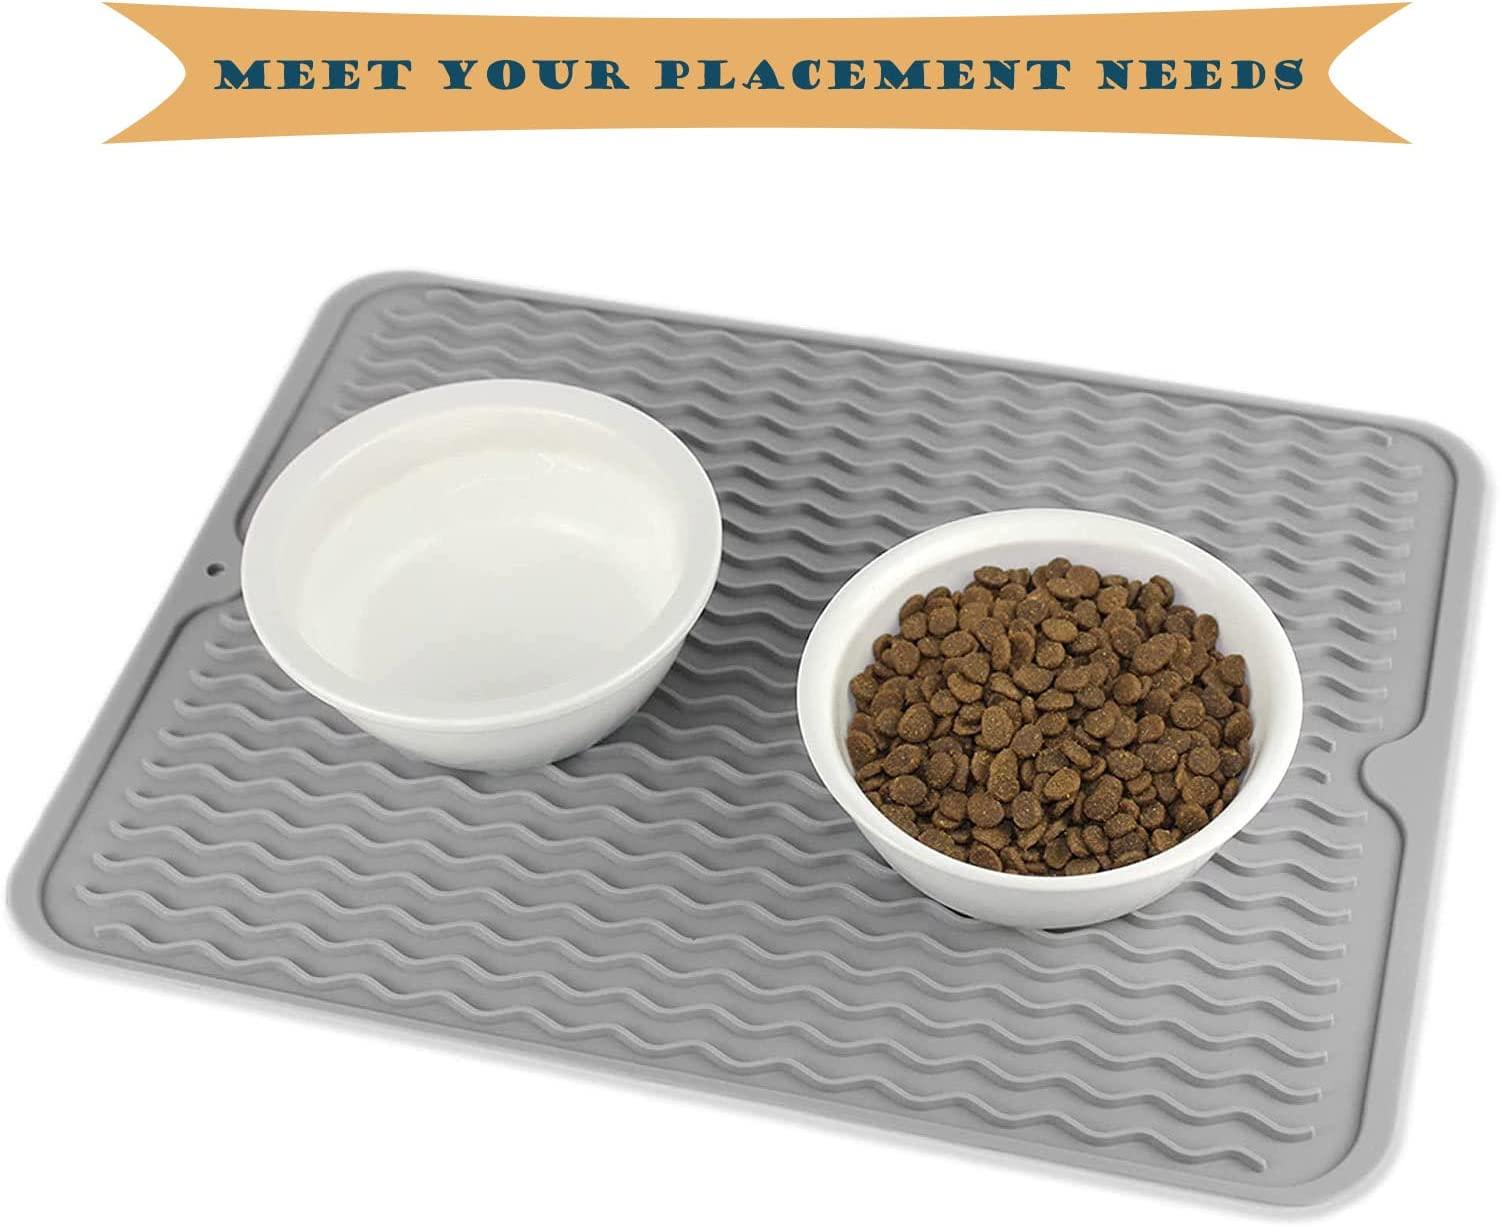 Silicone Pet Food Mat Waterproof Dog Bowl Mat Cat Pad Feeding Placement  Tray to Stop Food Spills and Water Messes Out to Floor